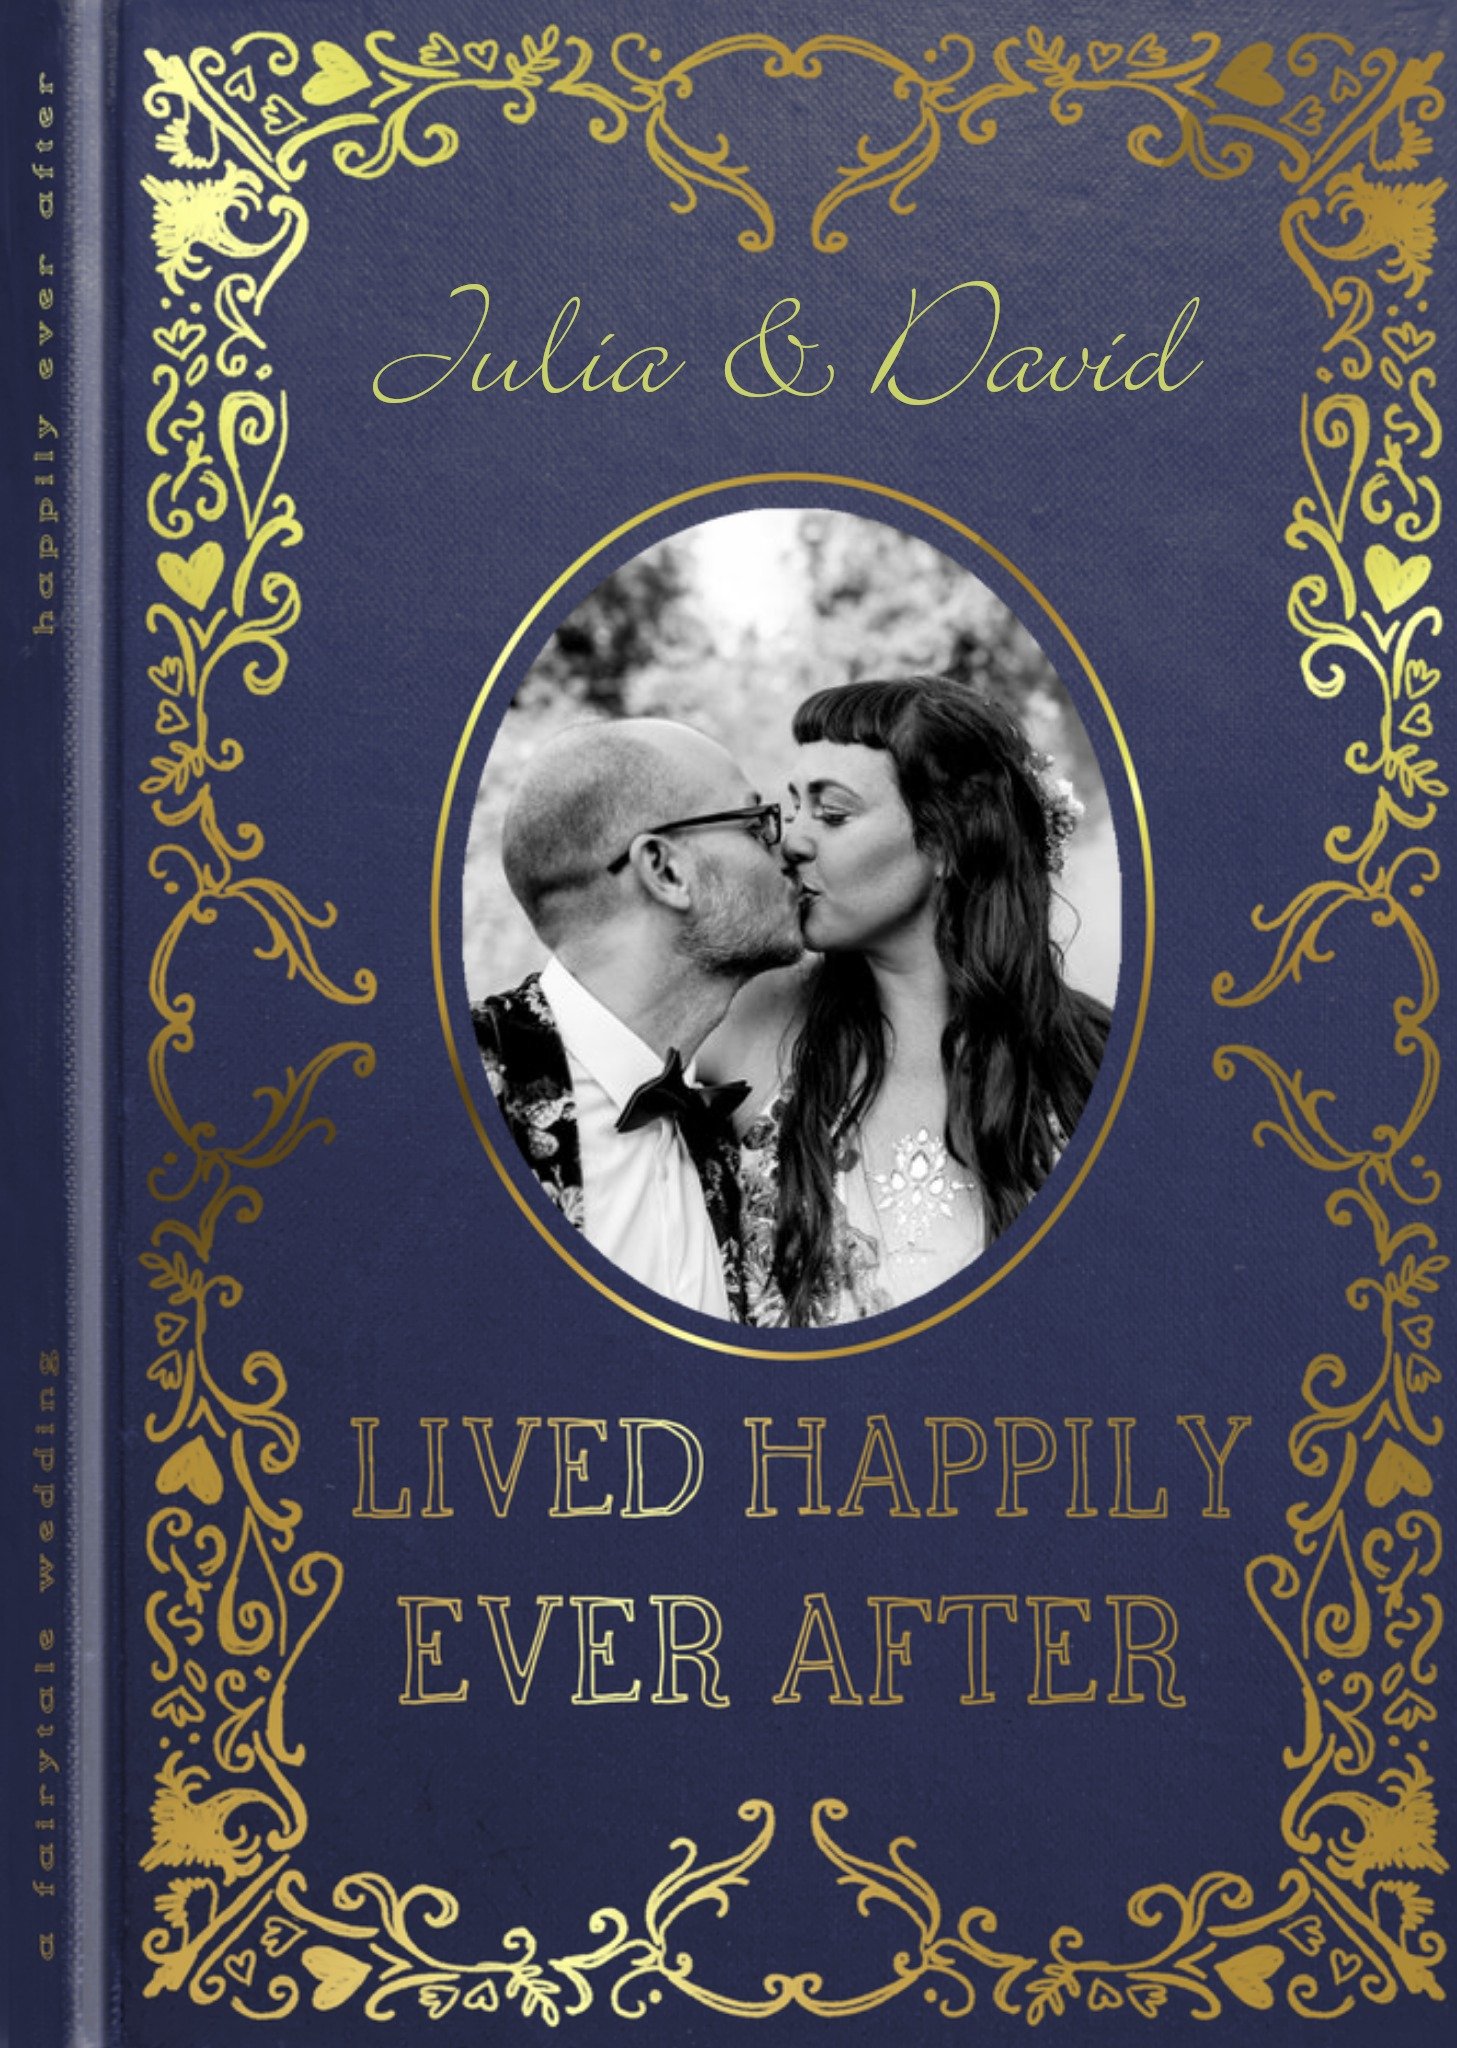 Okey Dokey Design Book Cover Photo Upload Lived Happily Ever After Wedding Card, Large